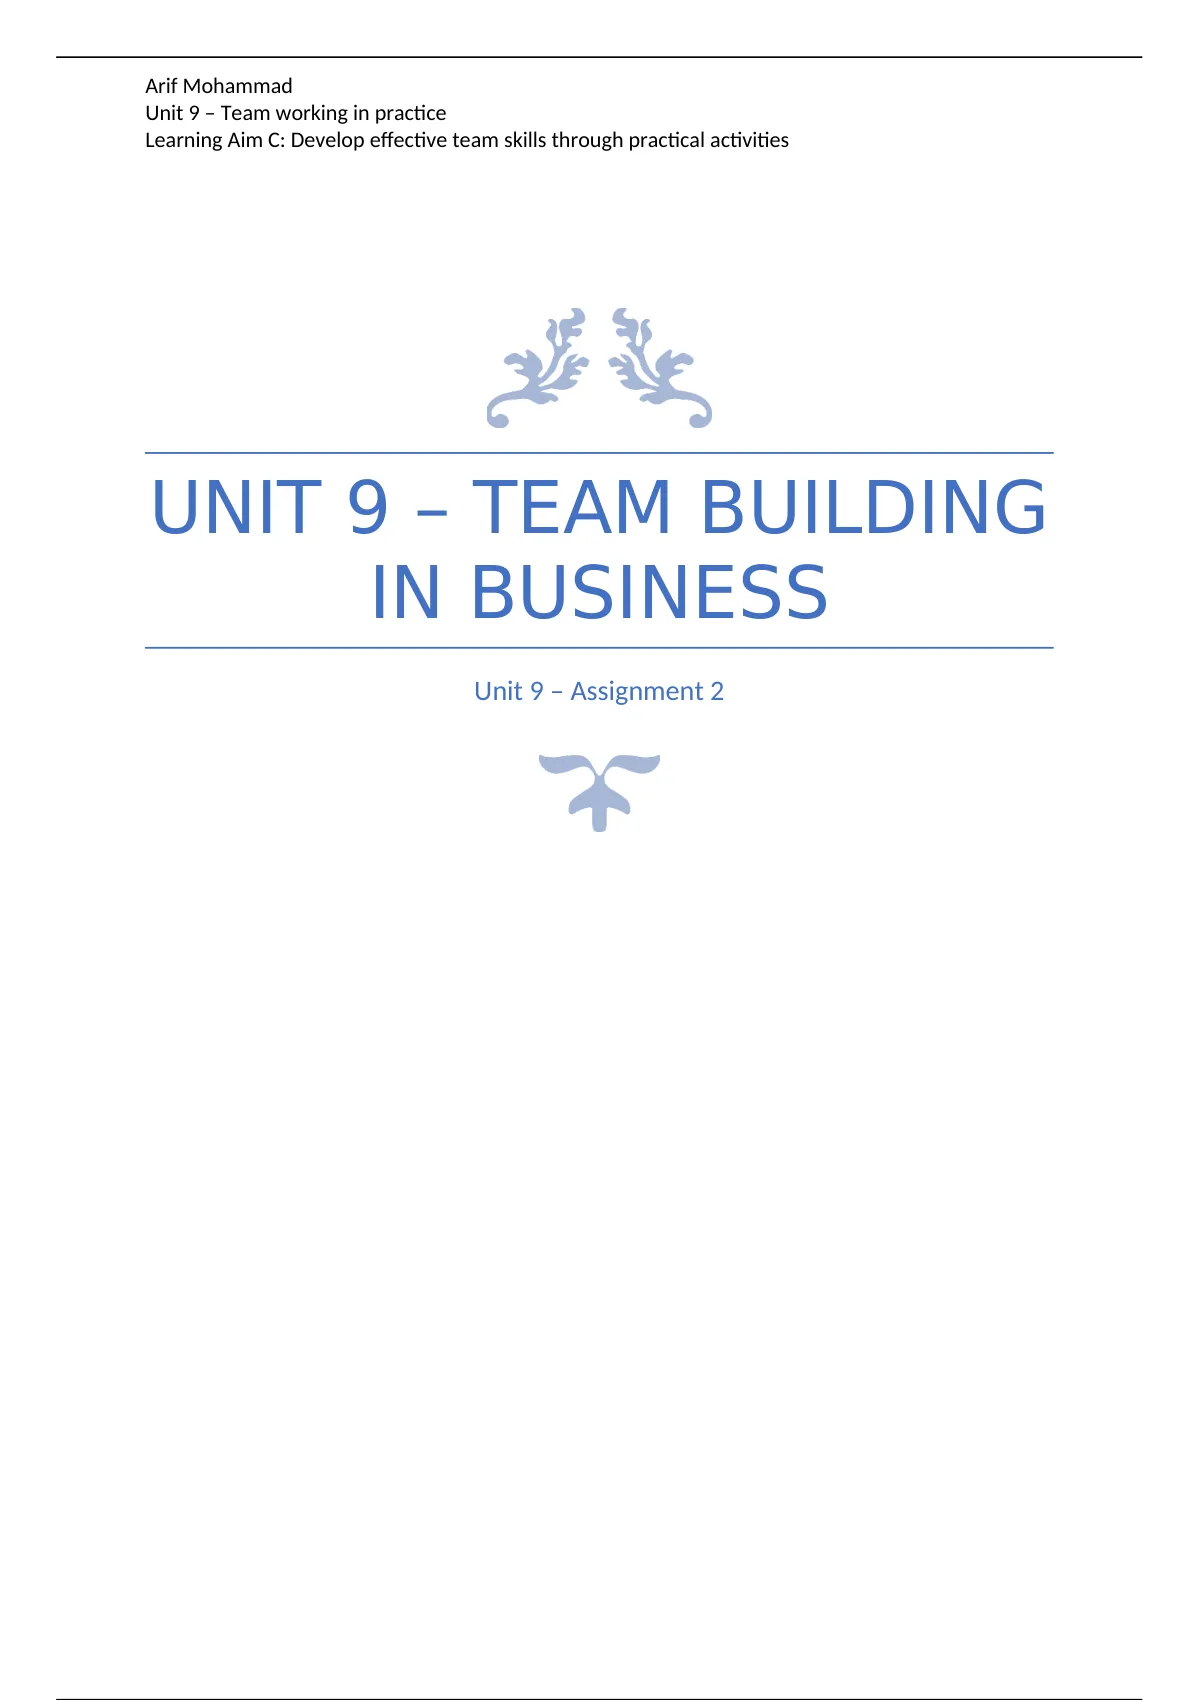 unit 9 team building in business assignment 2